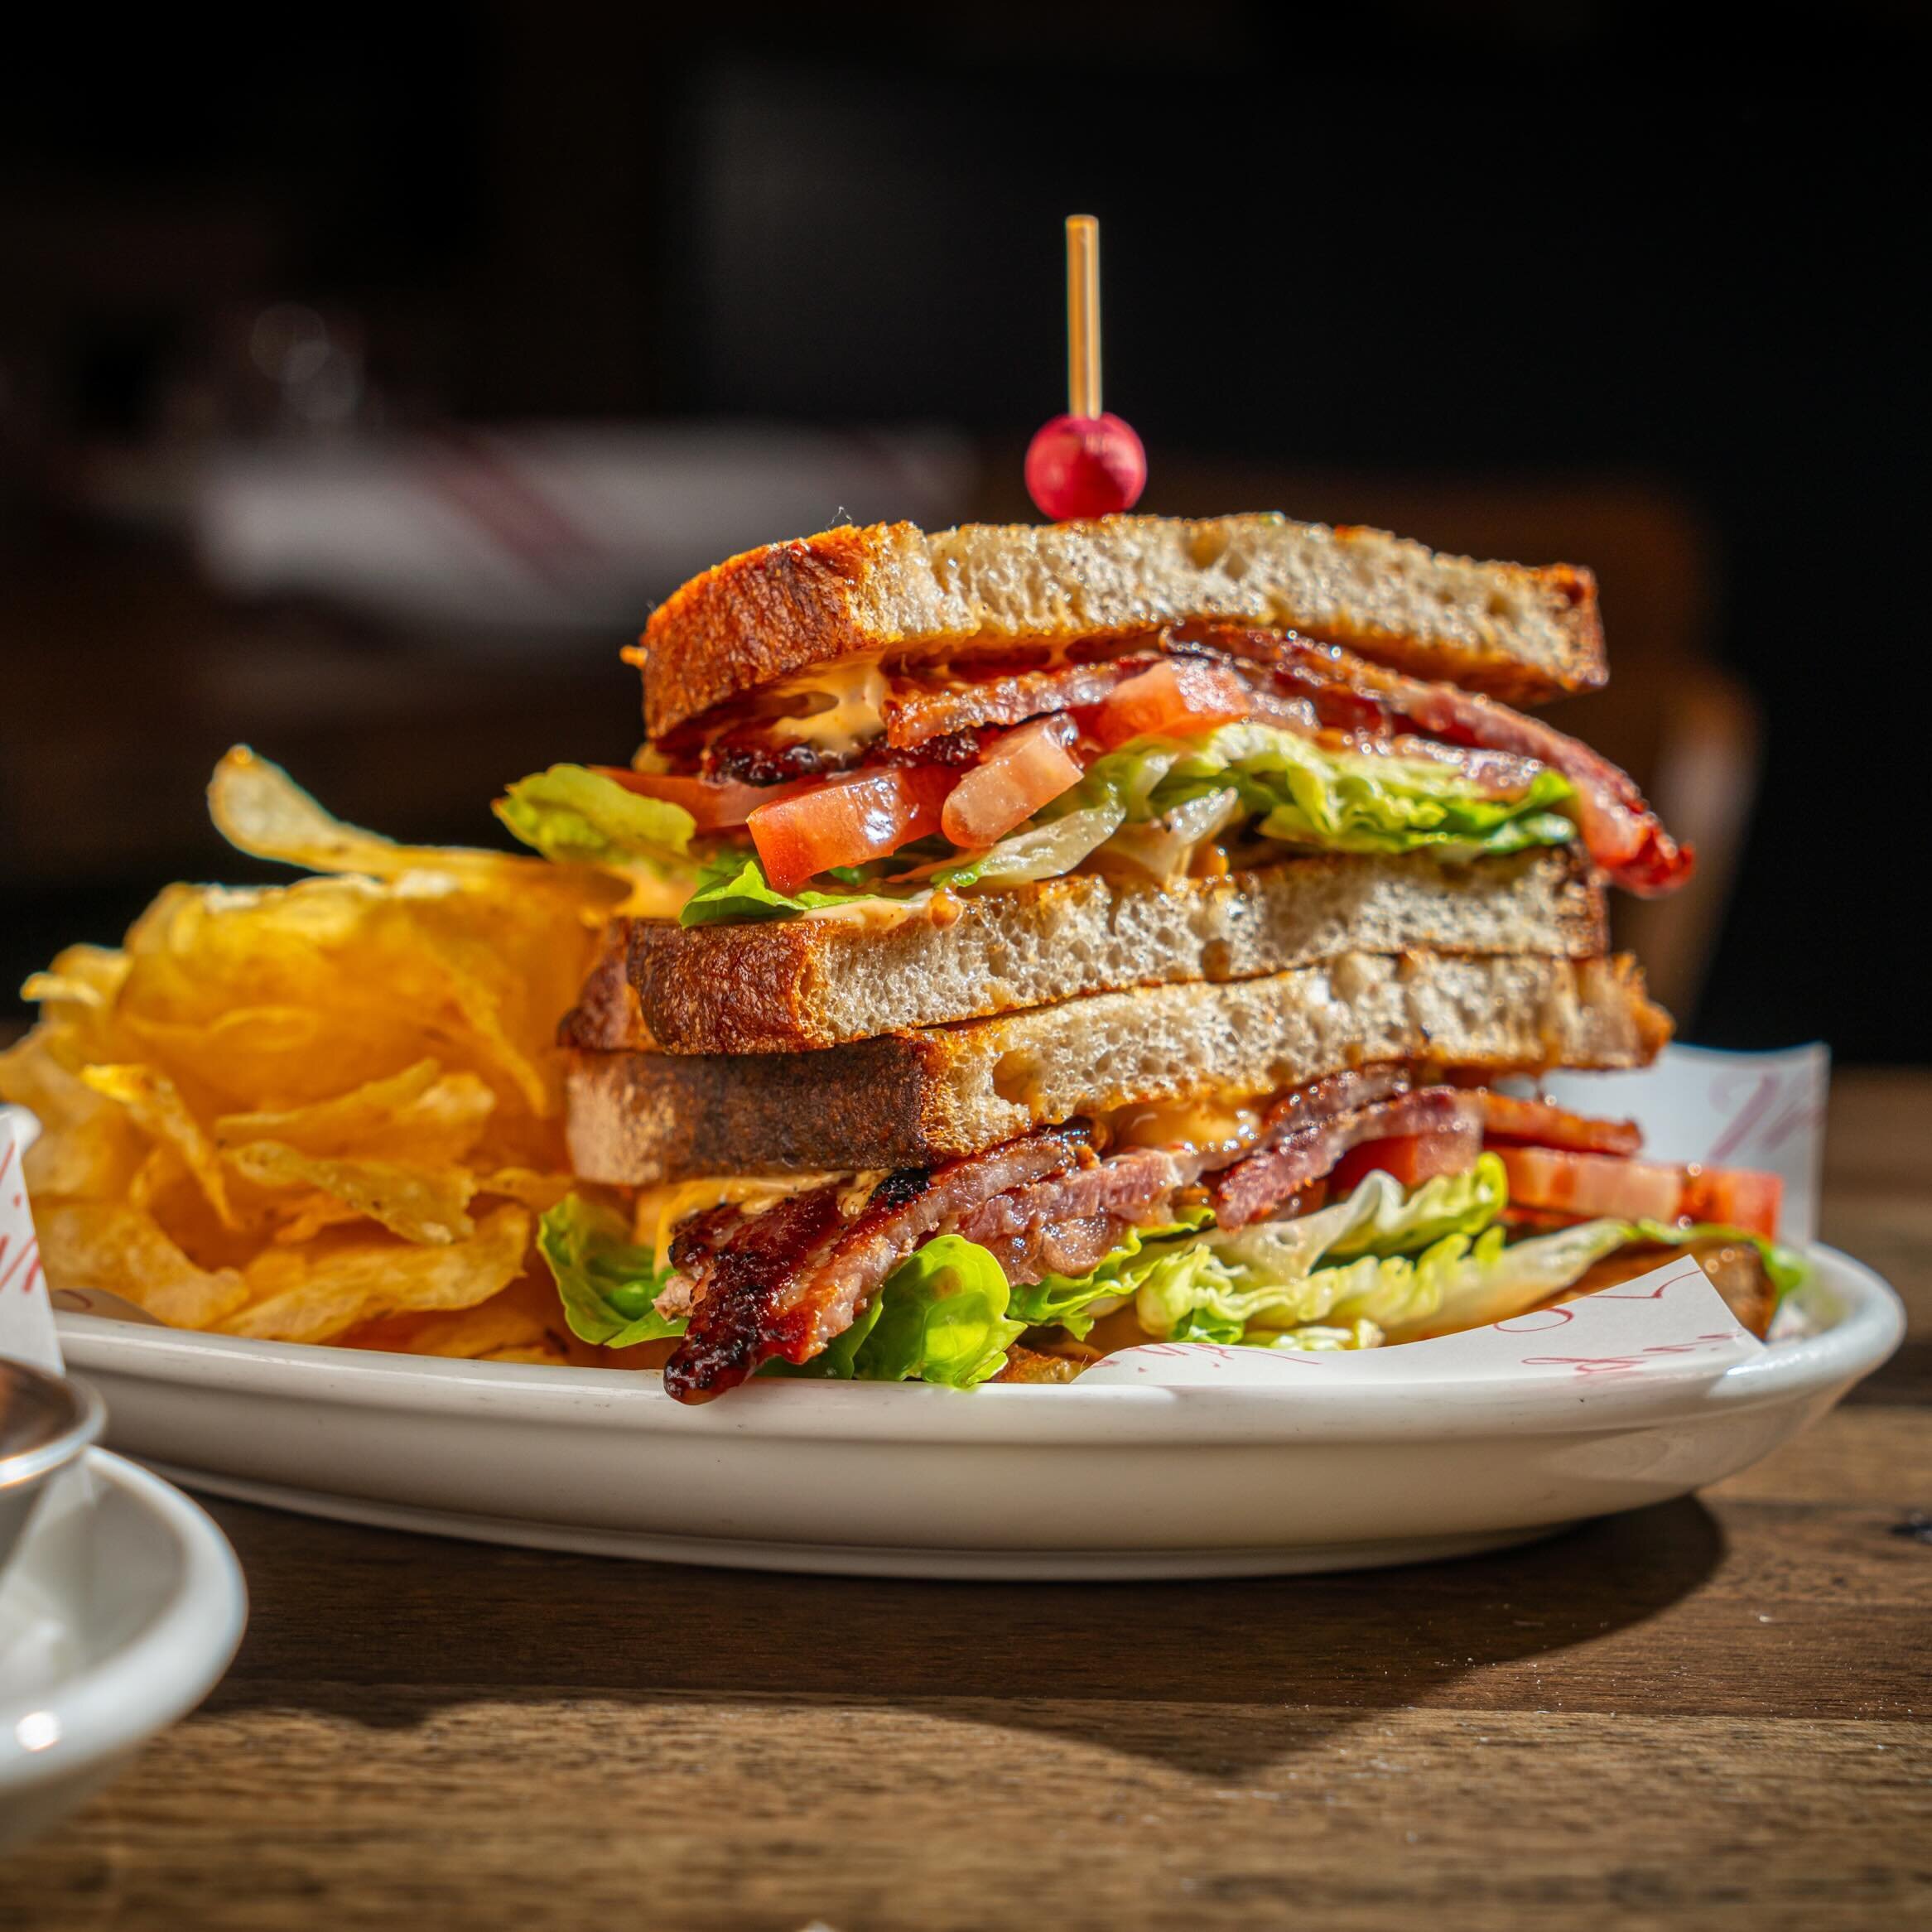 Did someone say BLT? 🥓🥬🍅 Join us every Friday from noon until 3 for Friday lunch! BLT is lunch service exclusive 😉✨🥪 Walk ins always welcome, reservations through @resy #virginiasnyc